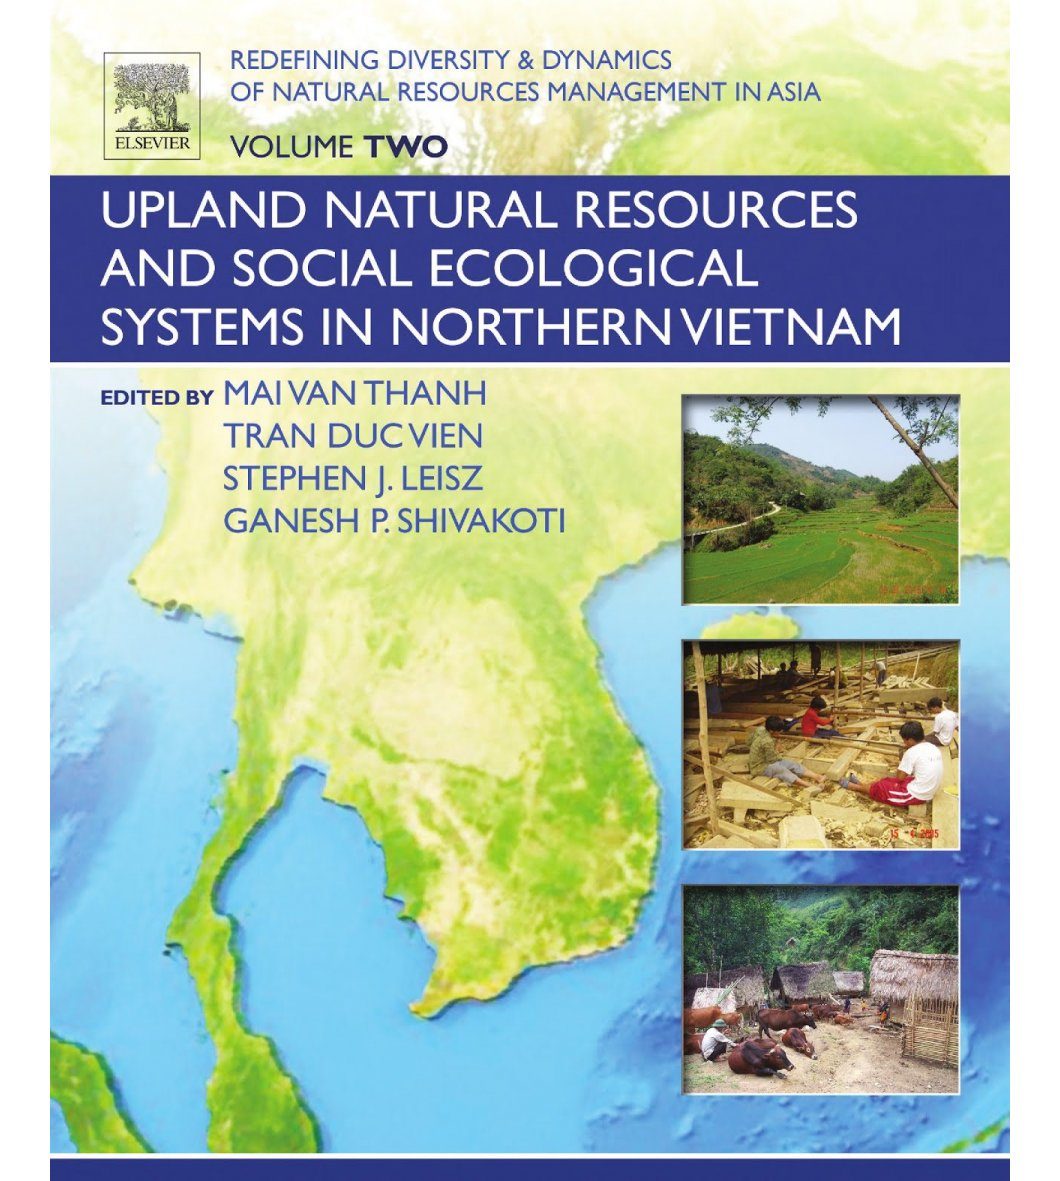 Asia,　Resources　Books　Redefining　Dynamics　Management　Diversity　and　Professional　of　Academic　Natural　in　Volume　NHBS